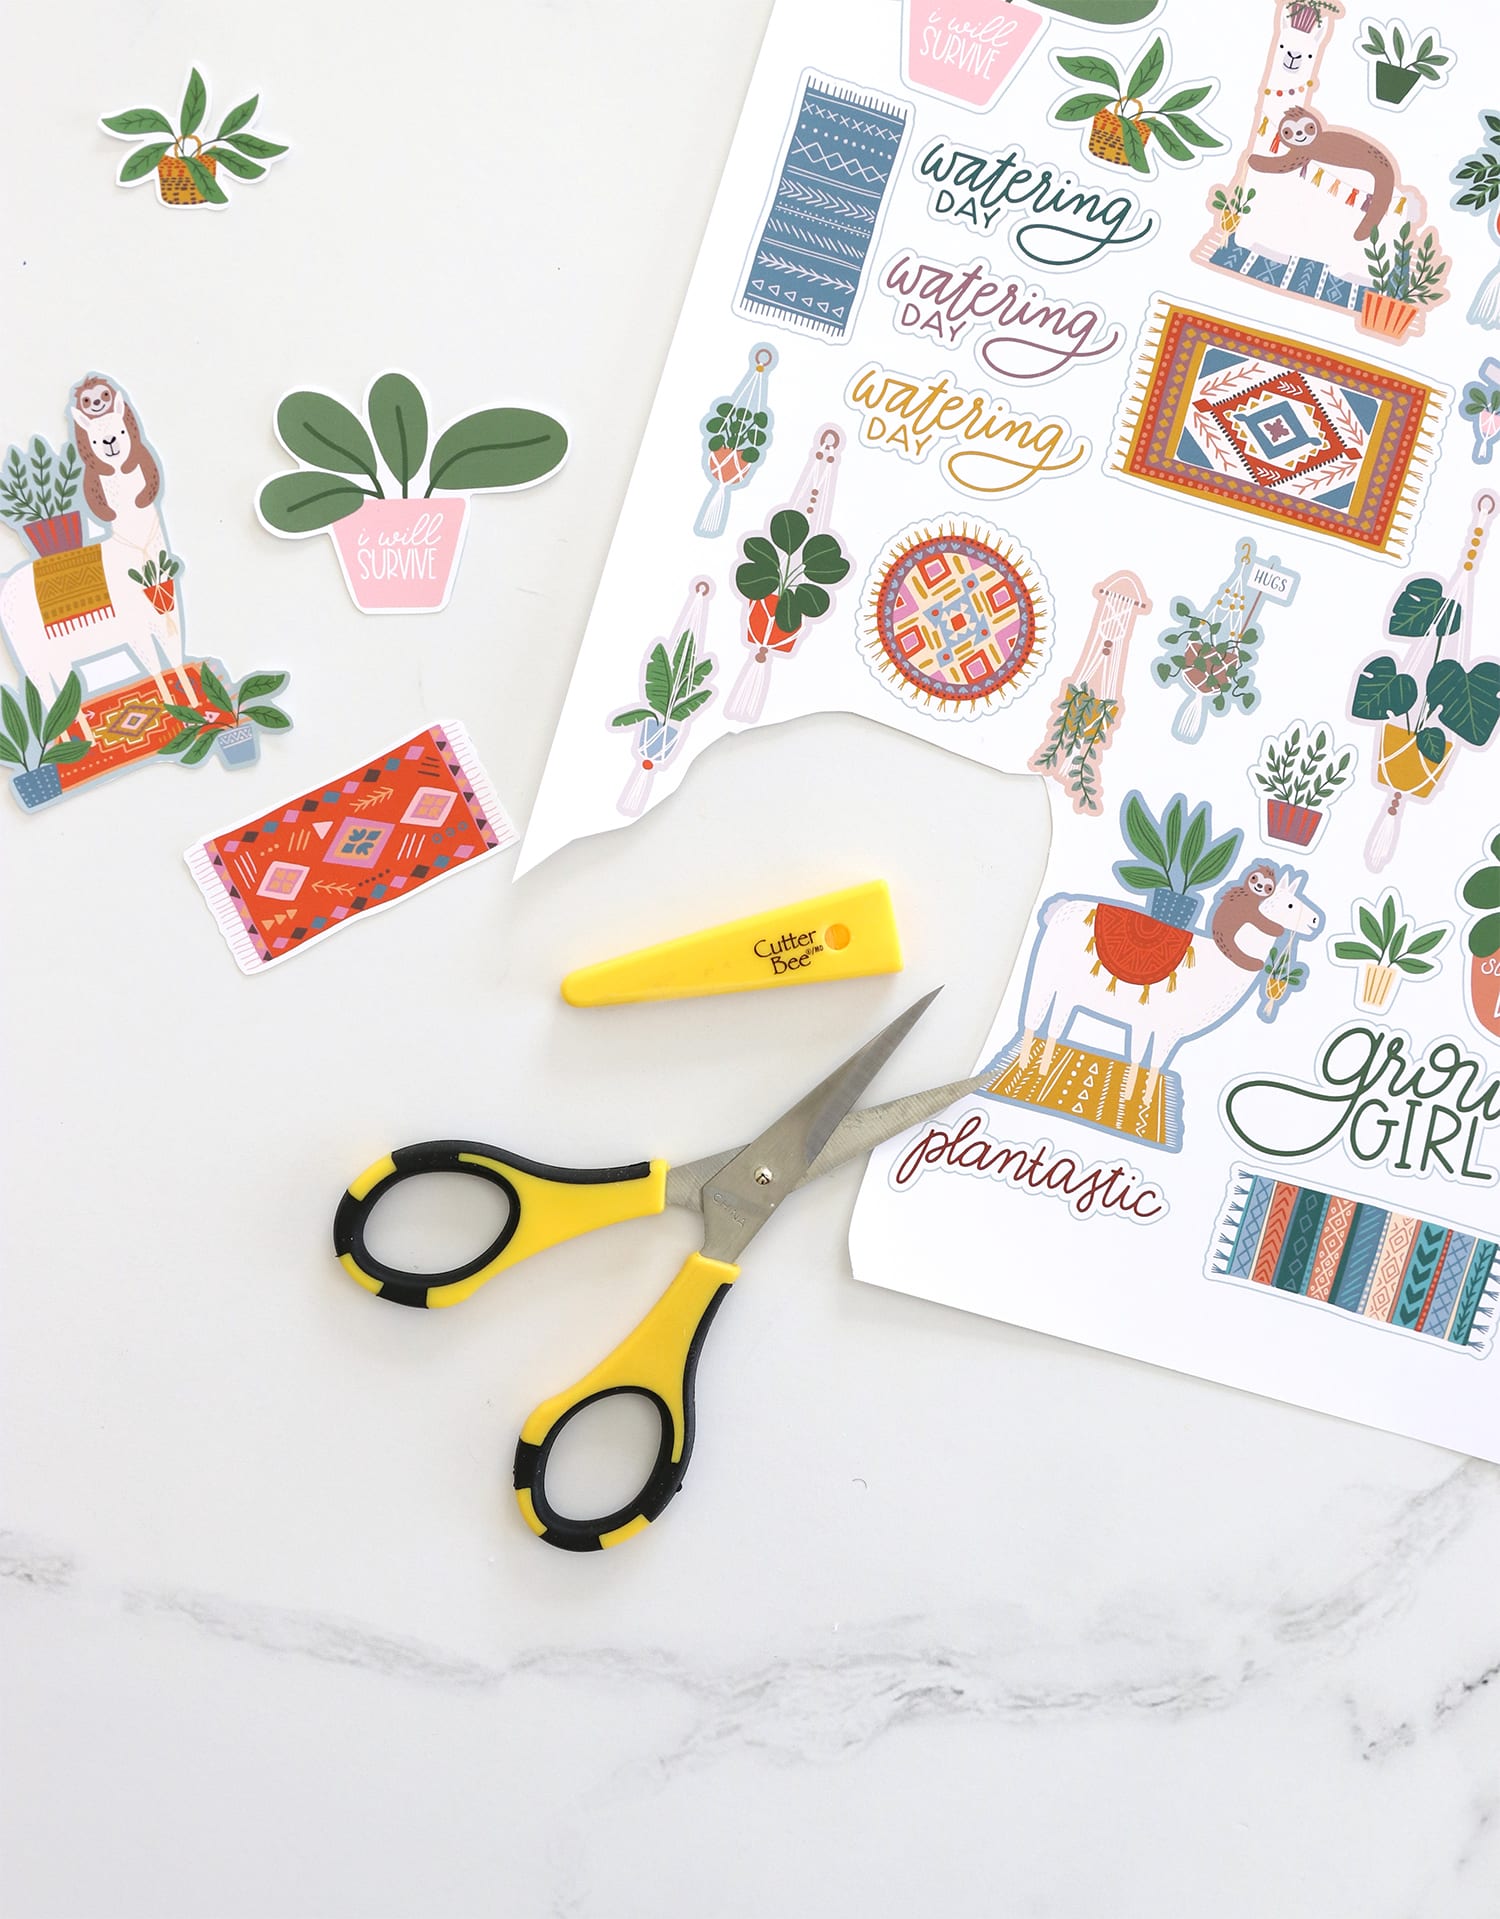 How To Make Stickers And Decals With Cricut - Organized-ish